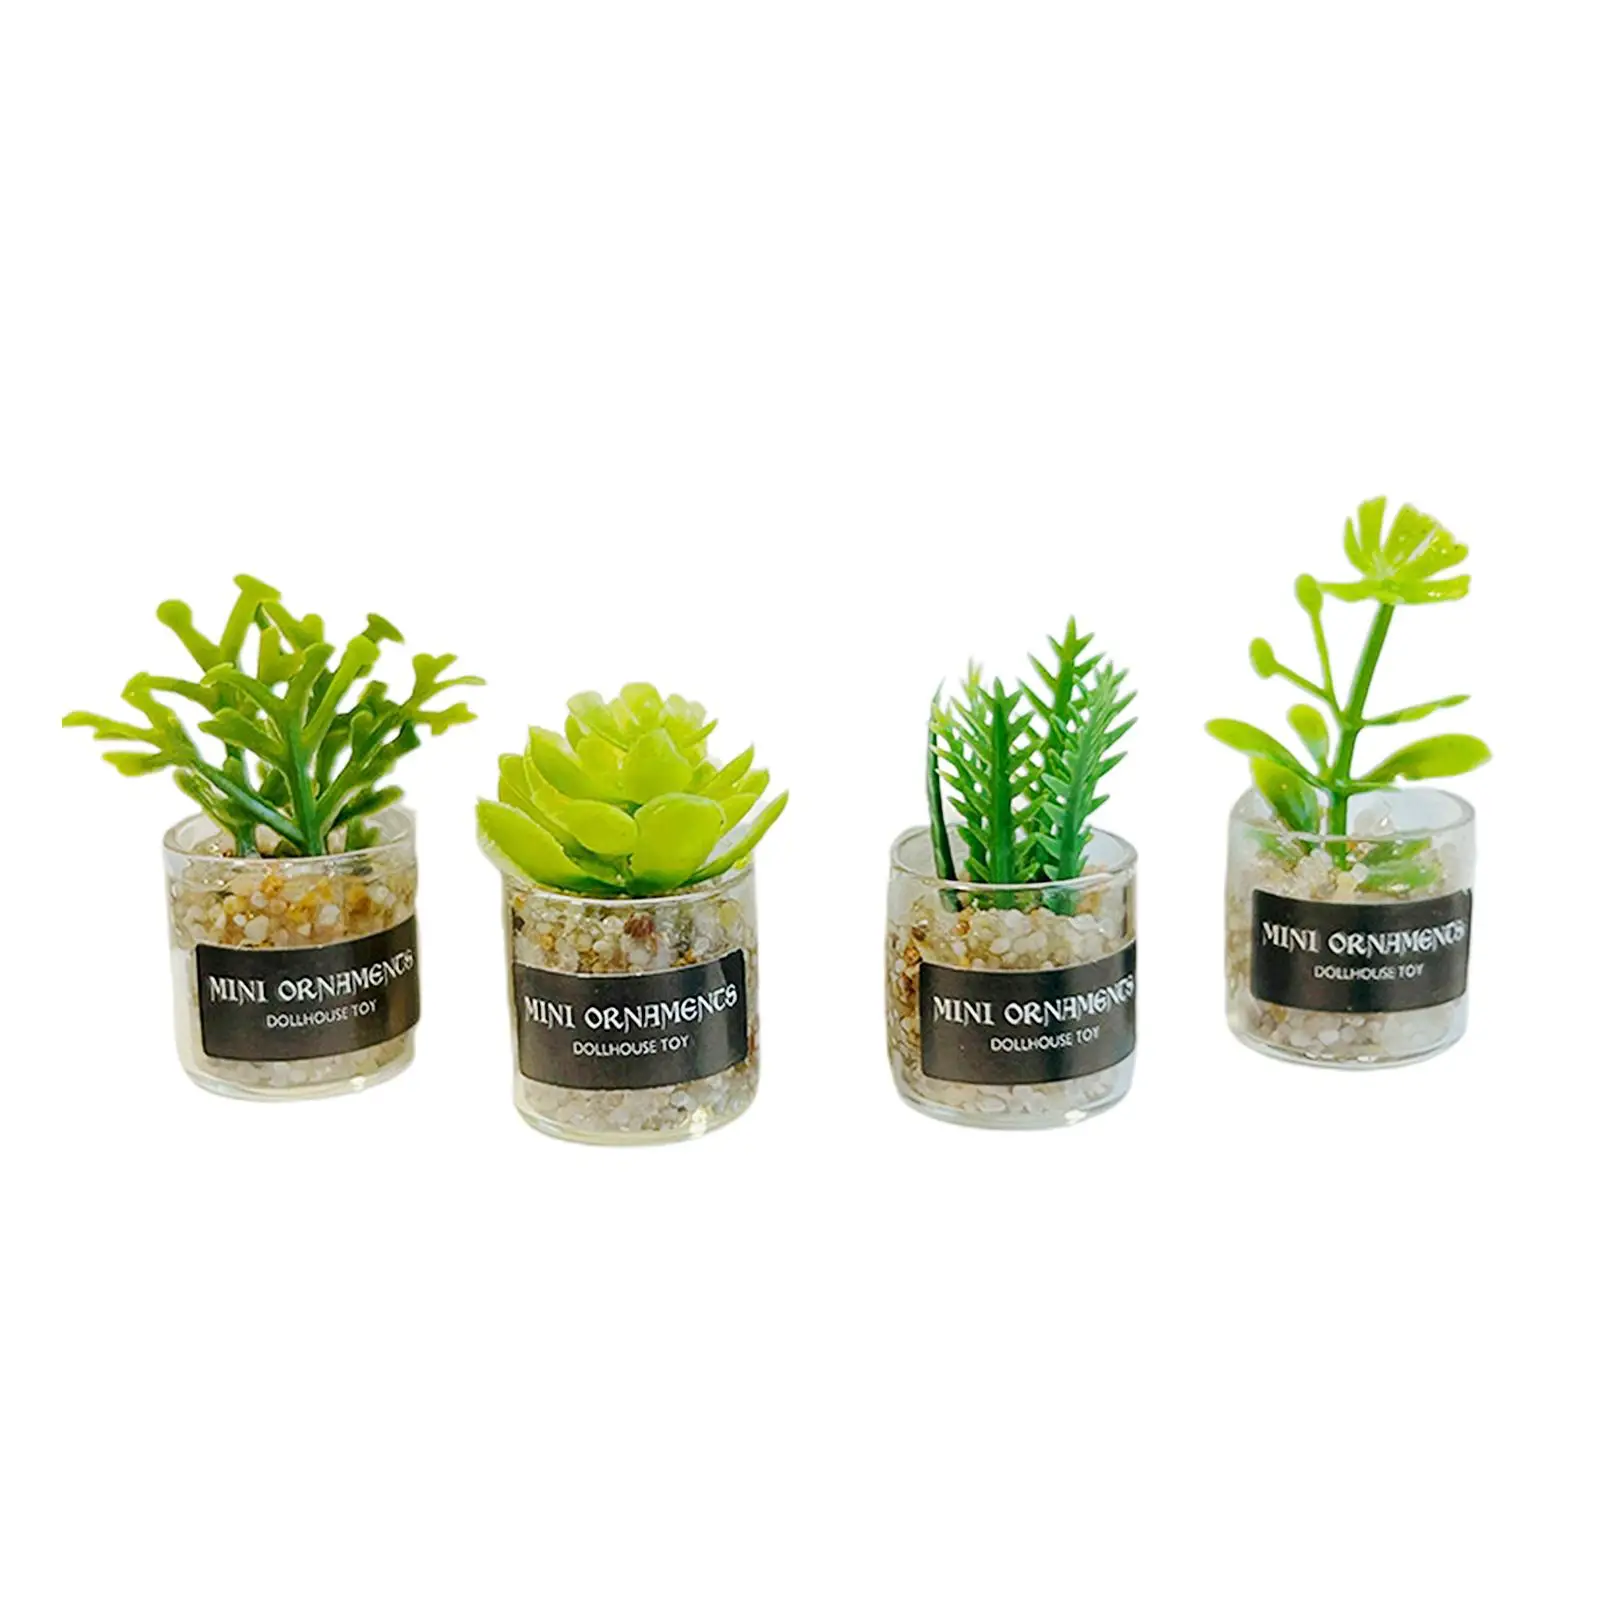 4 Pieces 1/12 Dolls House Miniature Plants Model Fake Greenery Potted Plants Simulation Plants for Dollhouse Fairy Garden Room